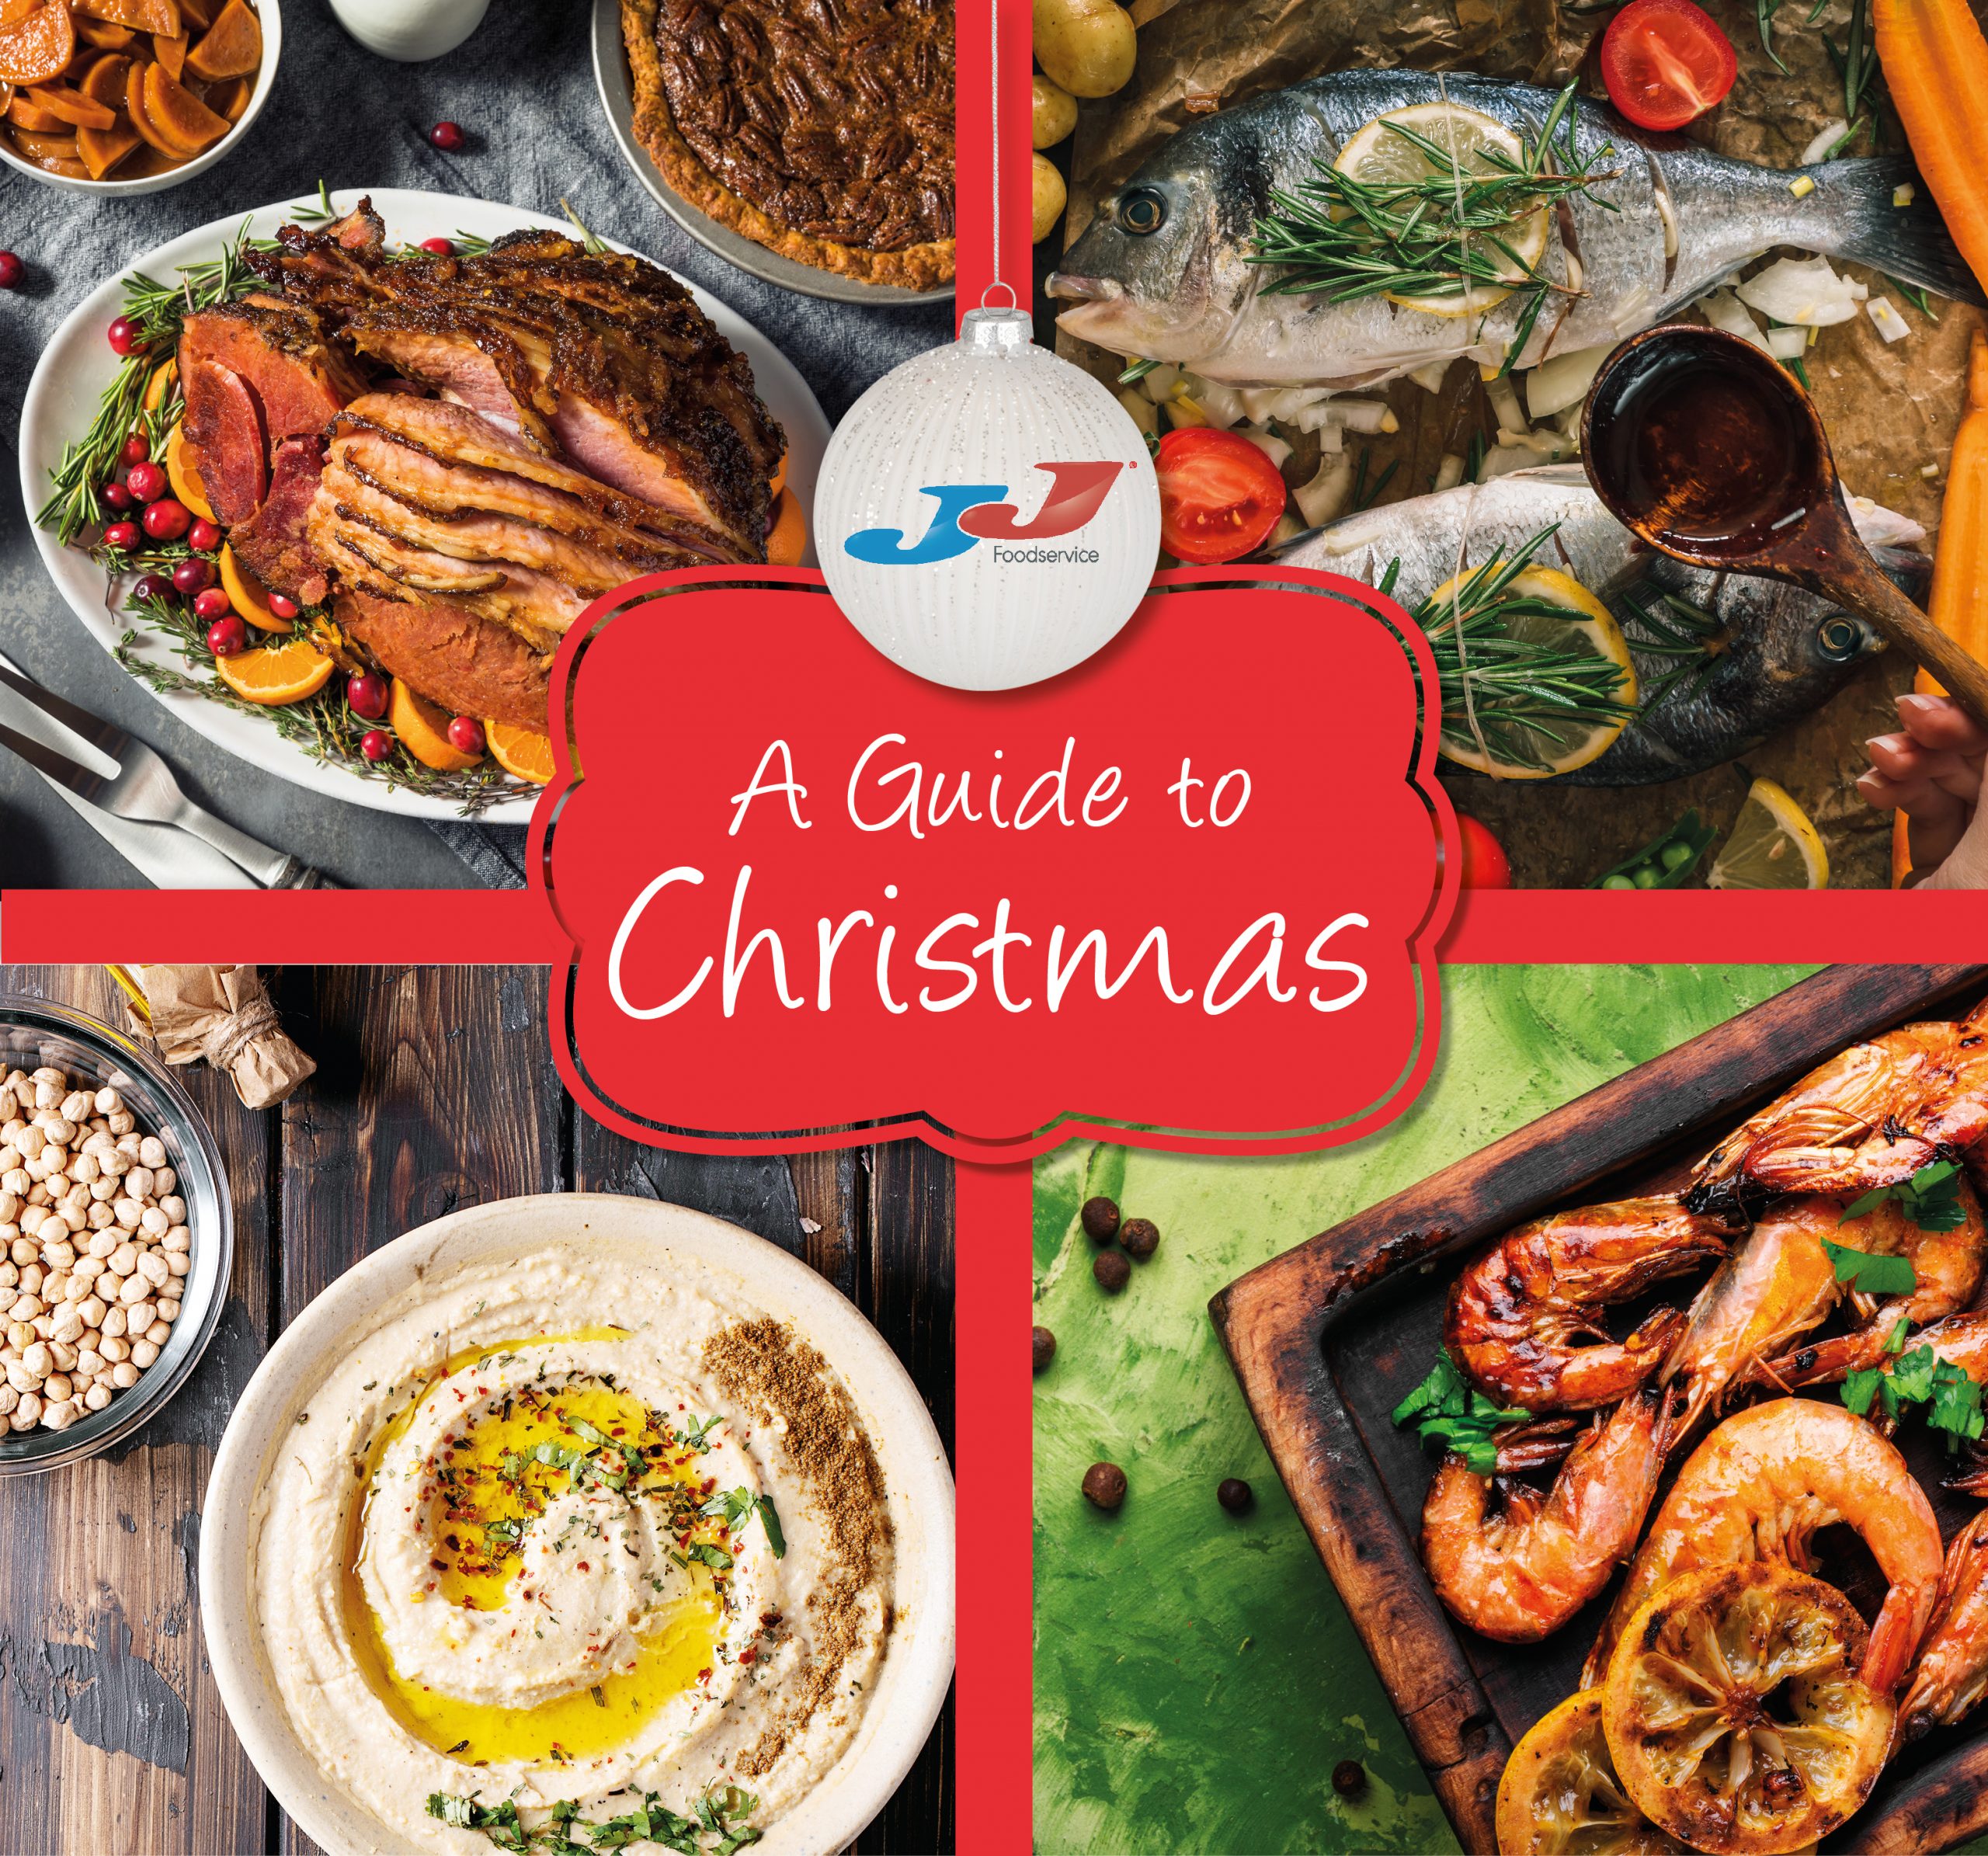 JJ Foodservice Guide to Christmas for restaurants and homes